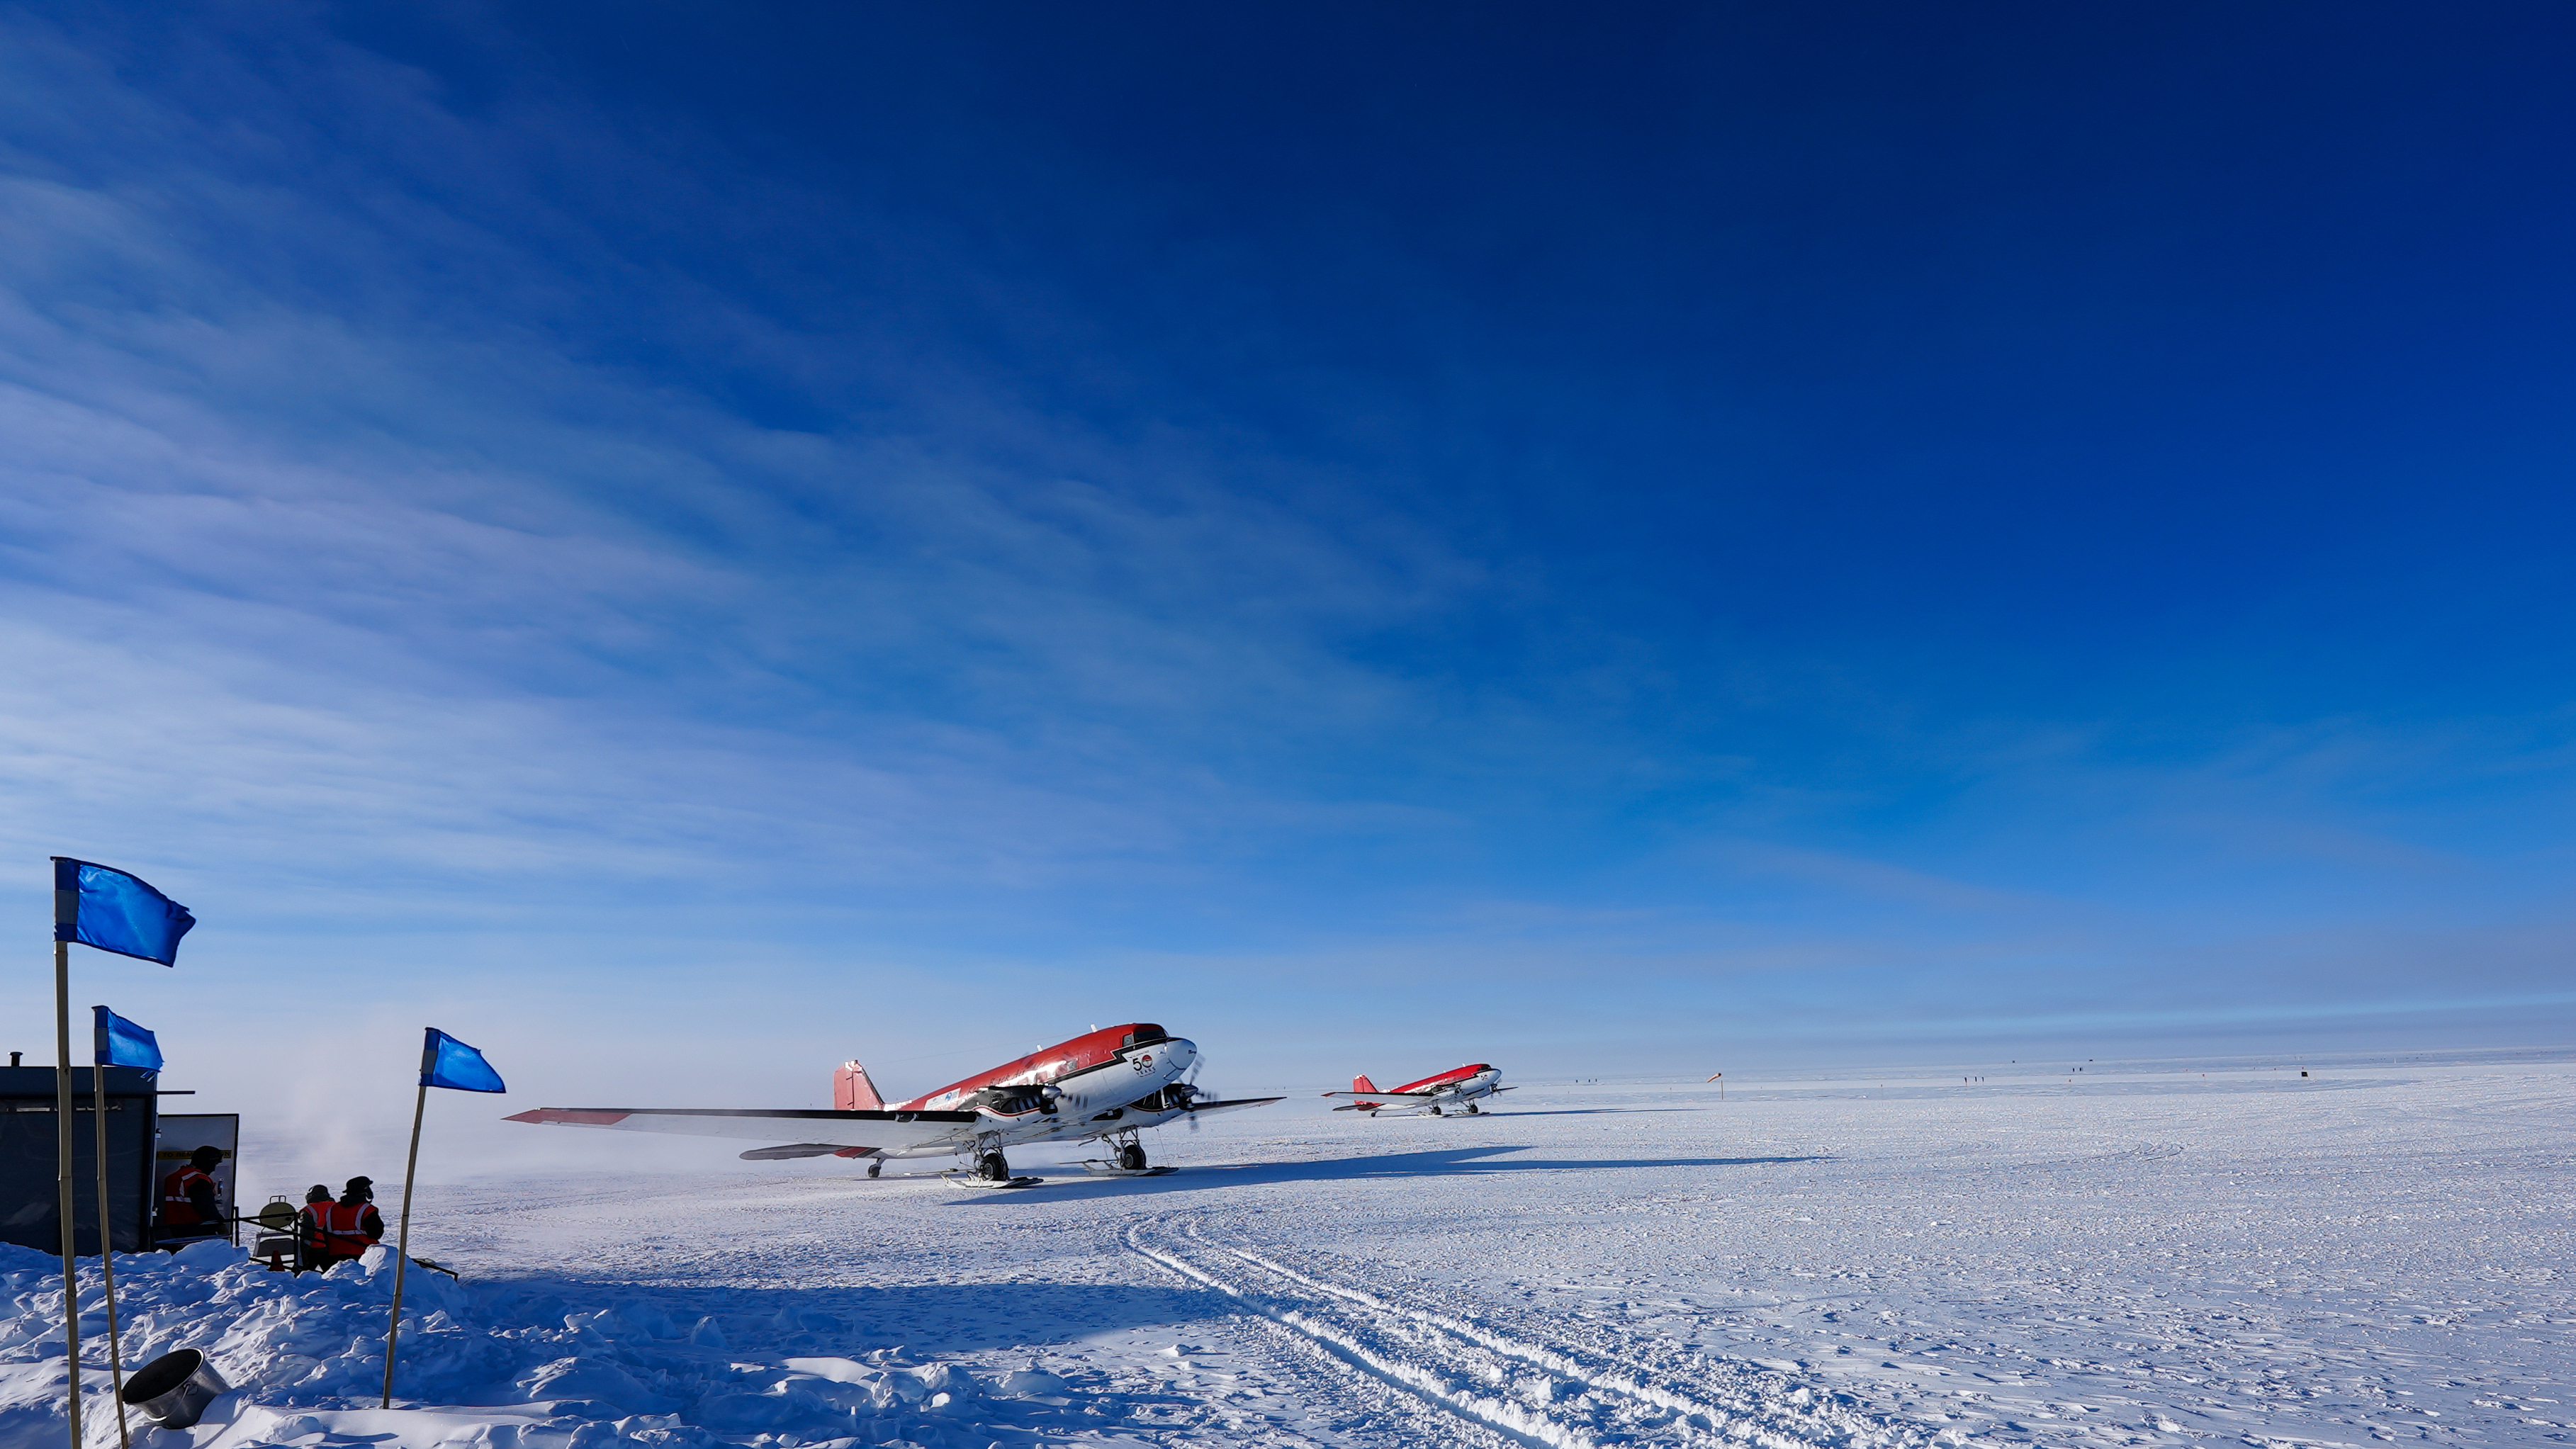 Two red and white airplanes with skis prepare to take off from a snow-covered landscape.